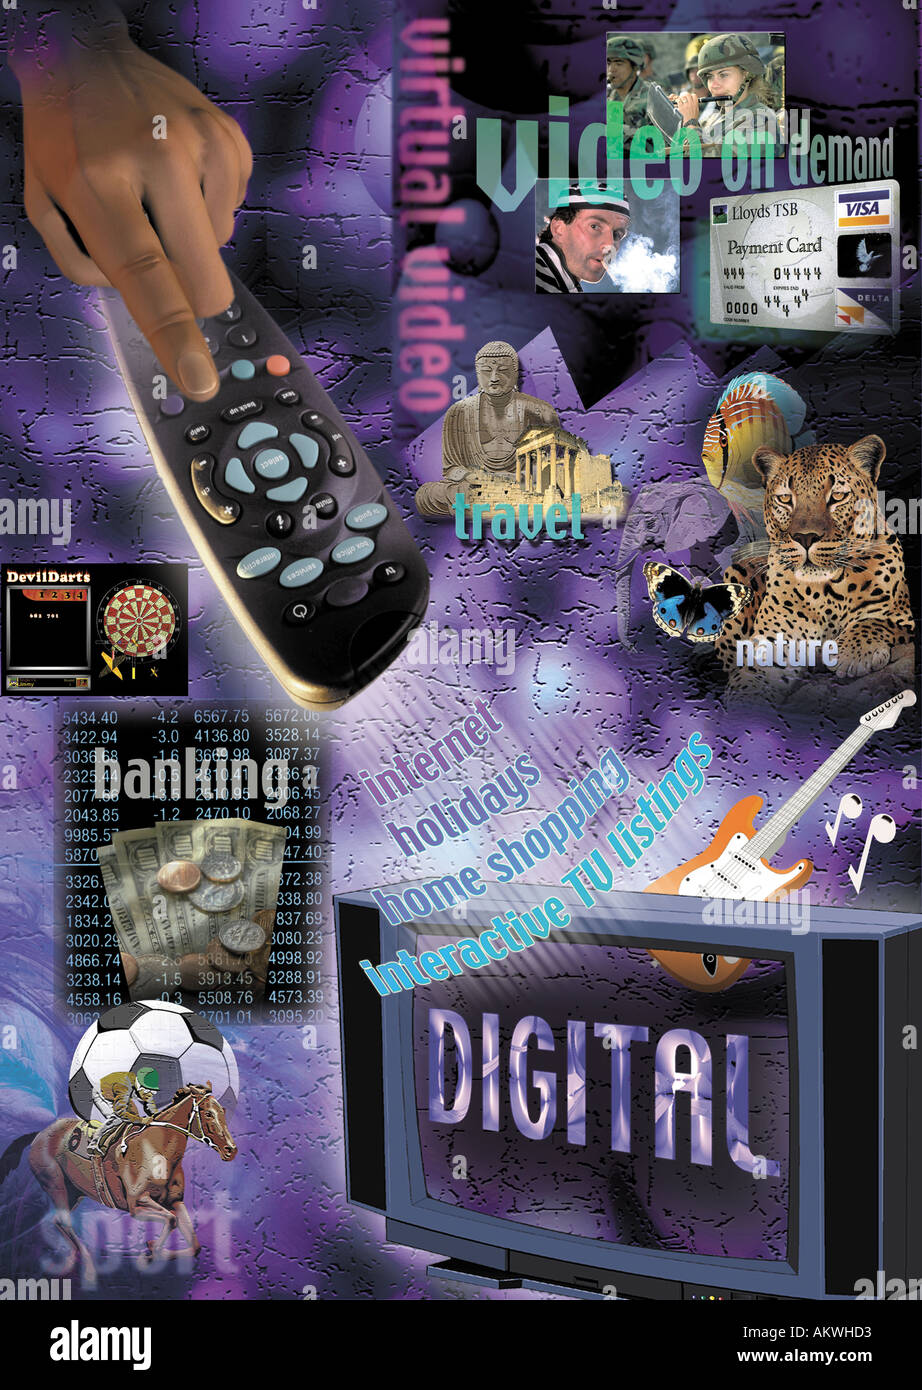 digital tv illustration showing tv remote control various lifestyle programs interconnecting communicating Stock Photo